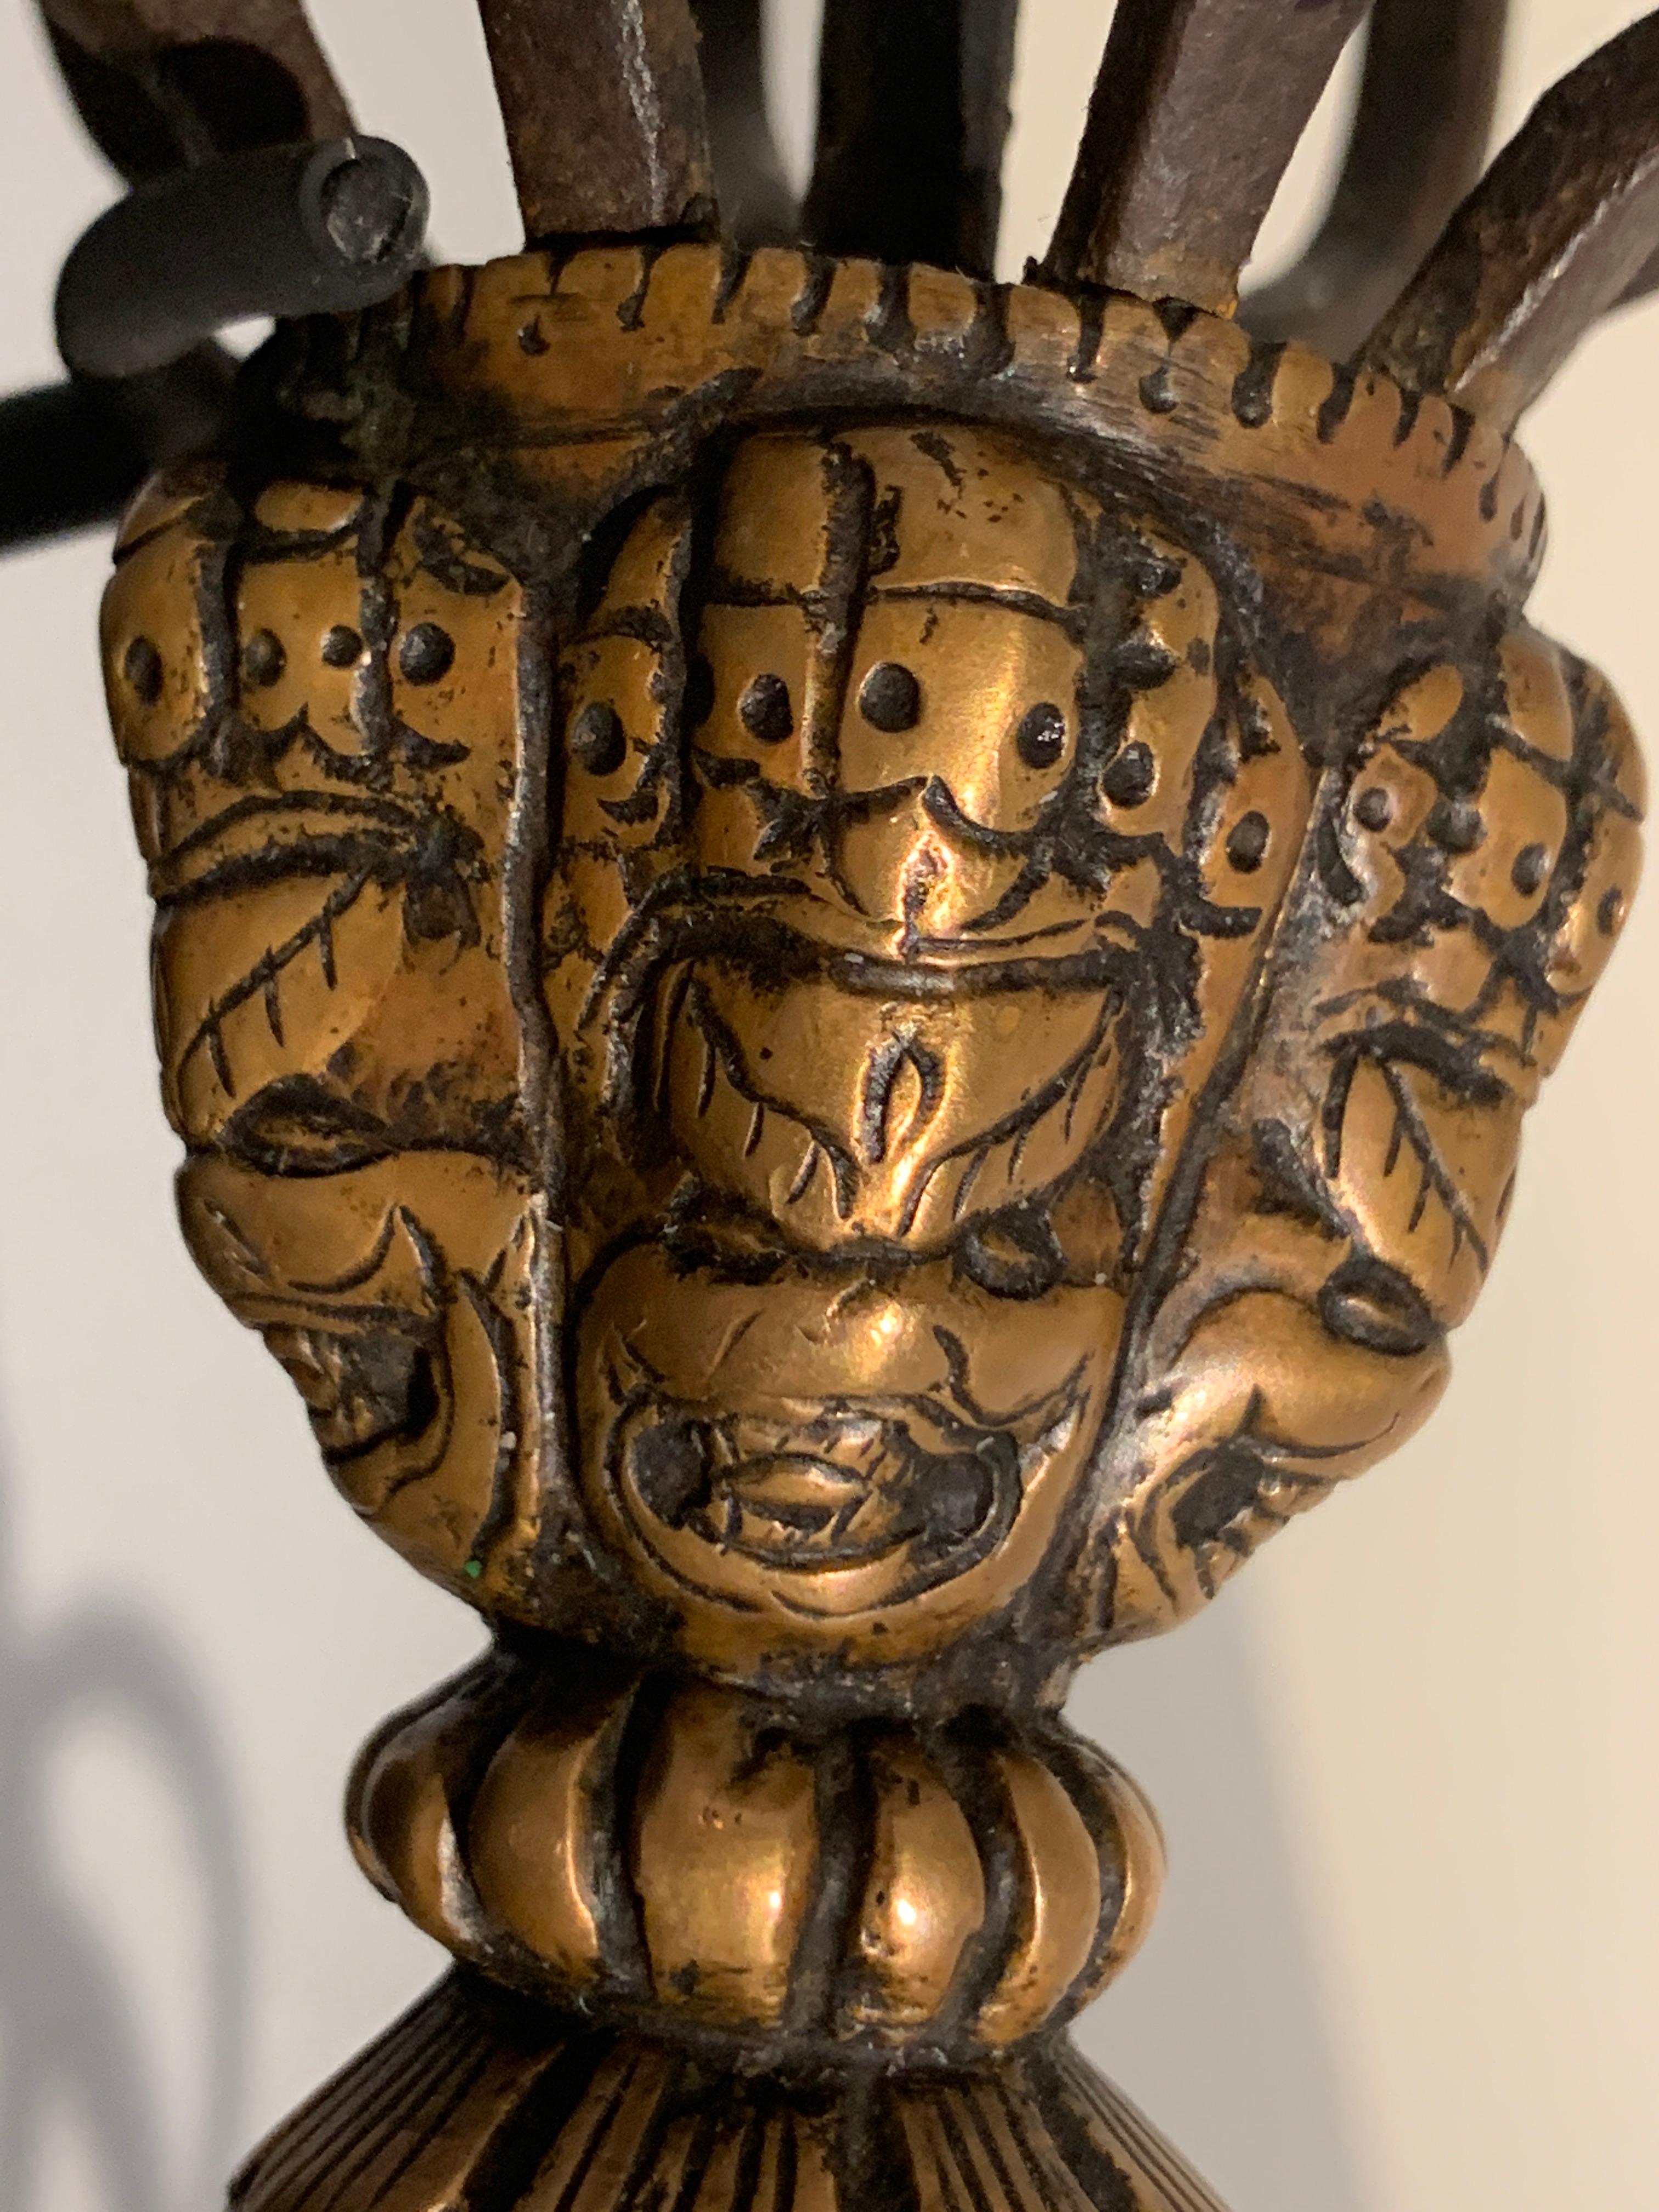 Large Himalayan Inlaid Bronze Vajra with Wrathful Faces, 15th-16th Century For Sale 1